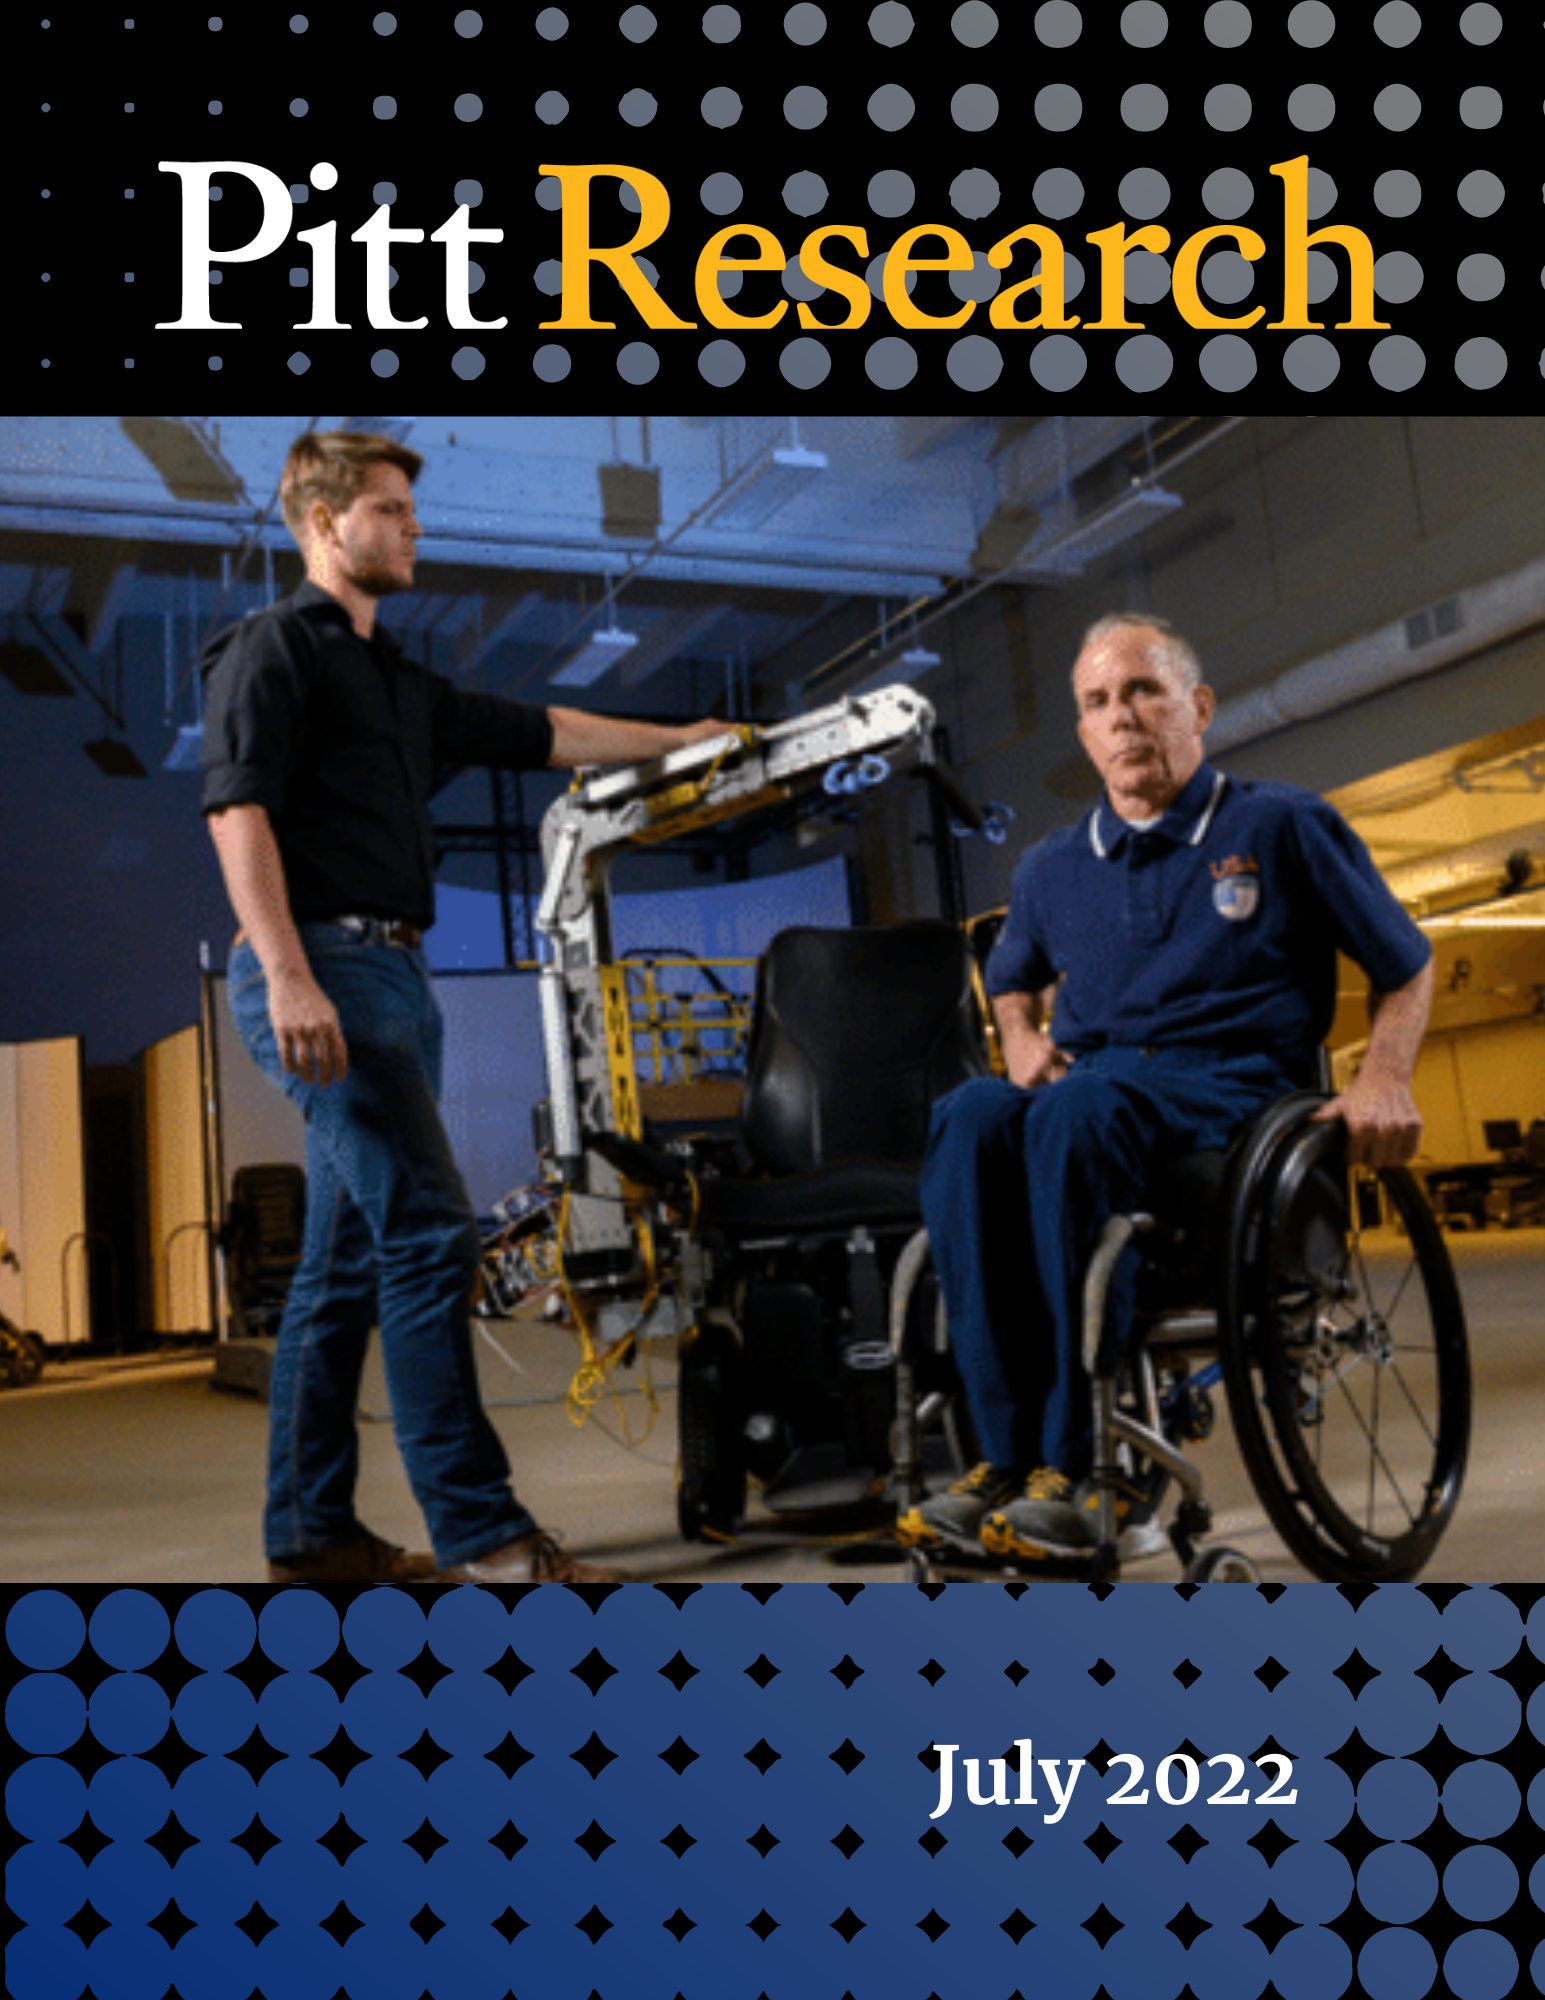 Pitt Research Newsletters for July 2022